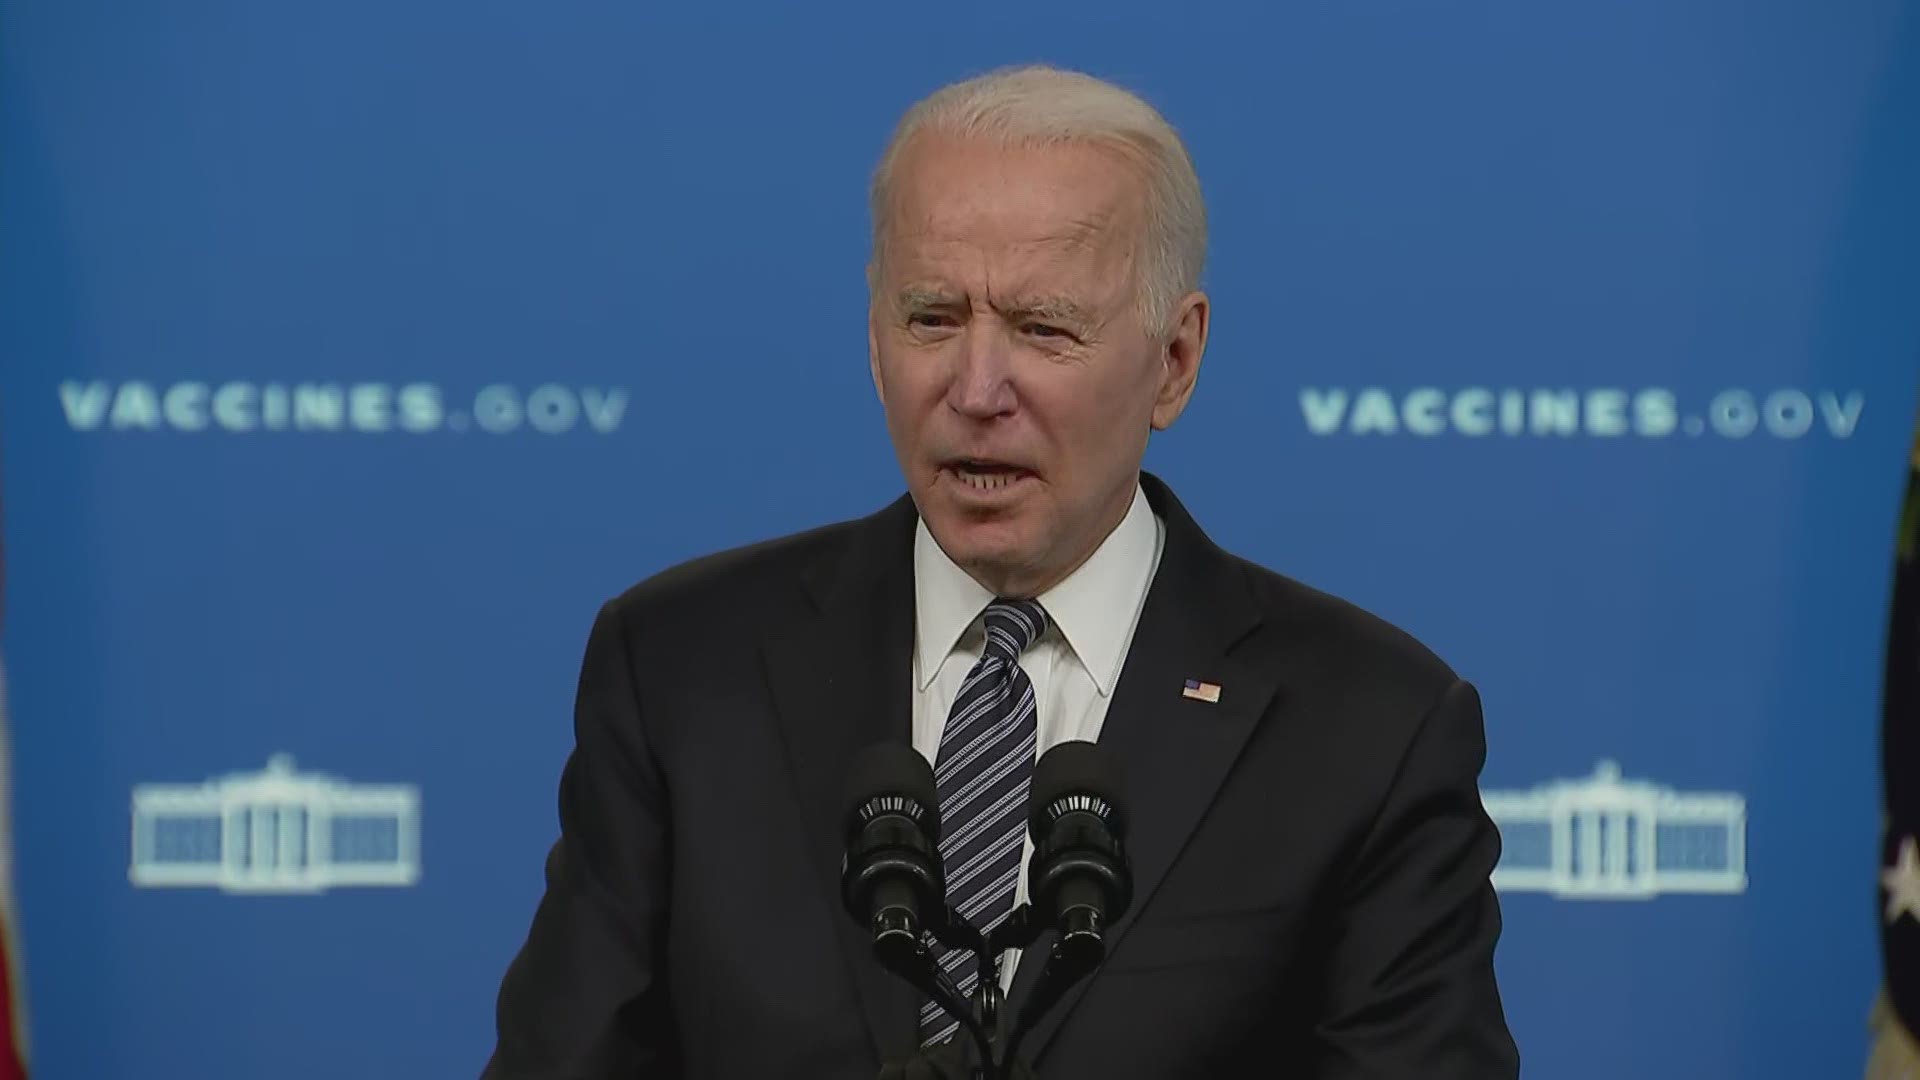 President Biden encouragingly said good news could be ahead in regards to the fuel shortages, but that the country needs more cybersecurity education focus.